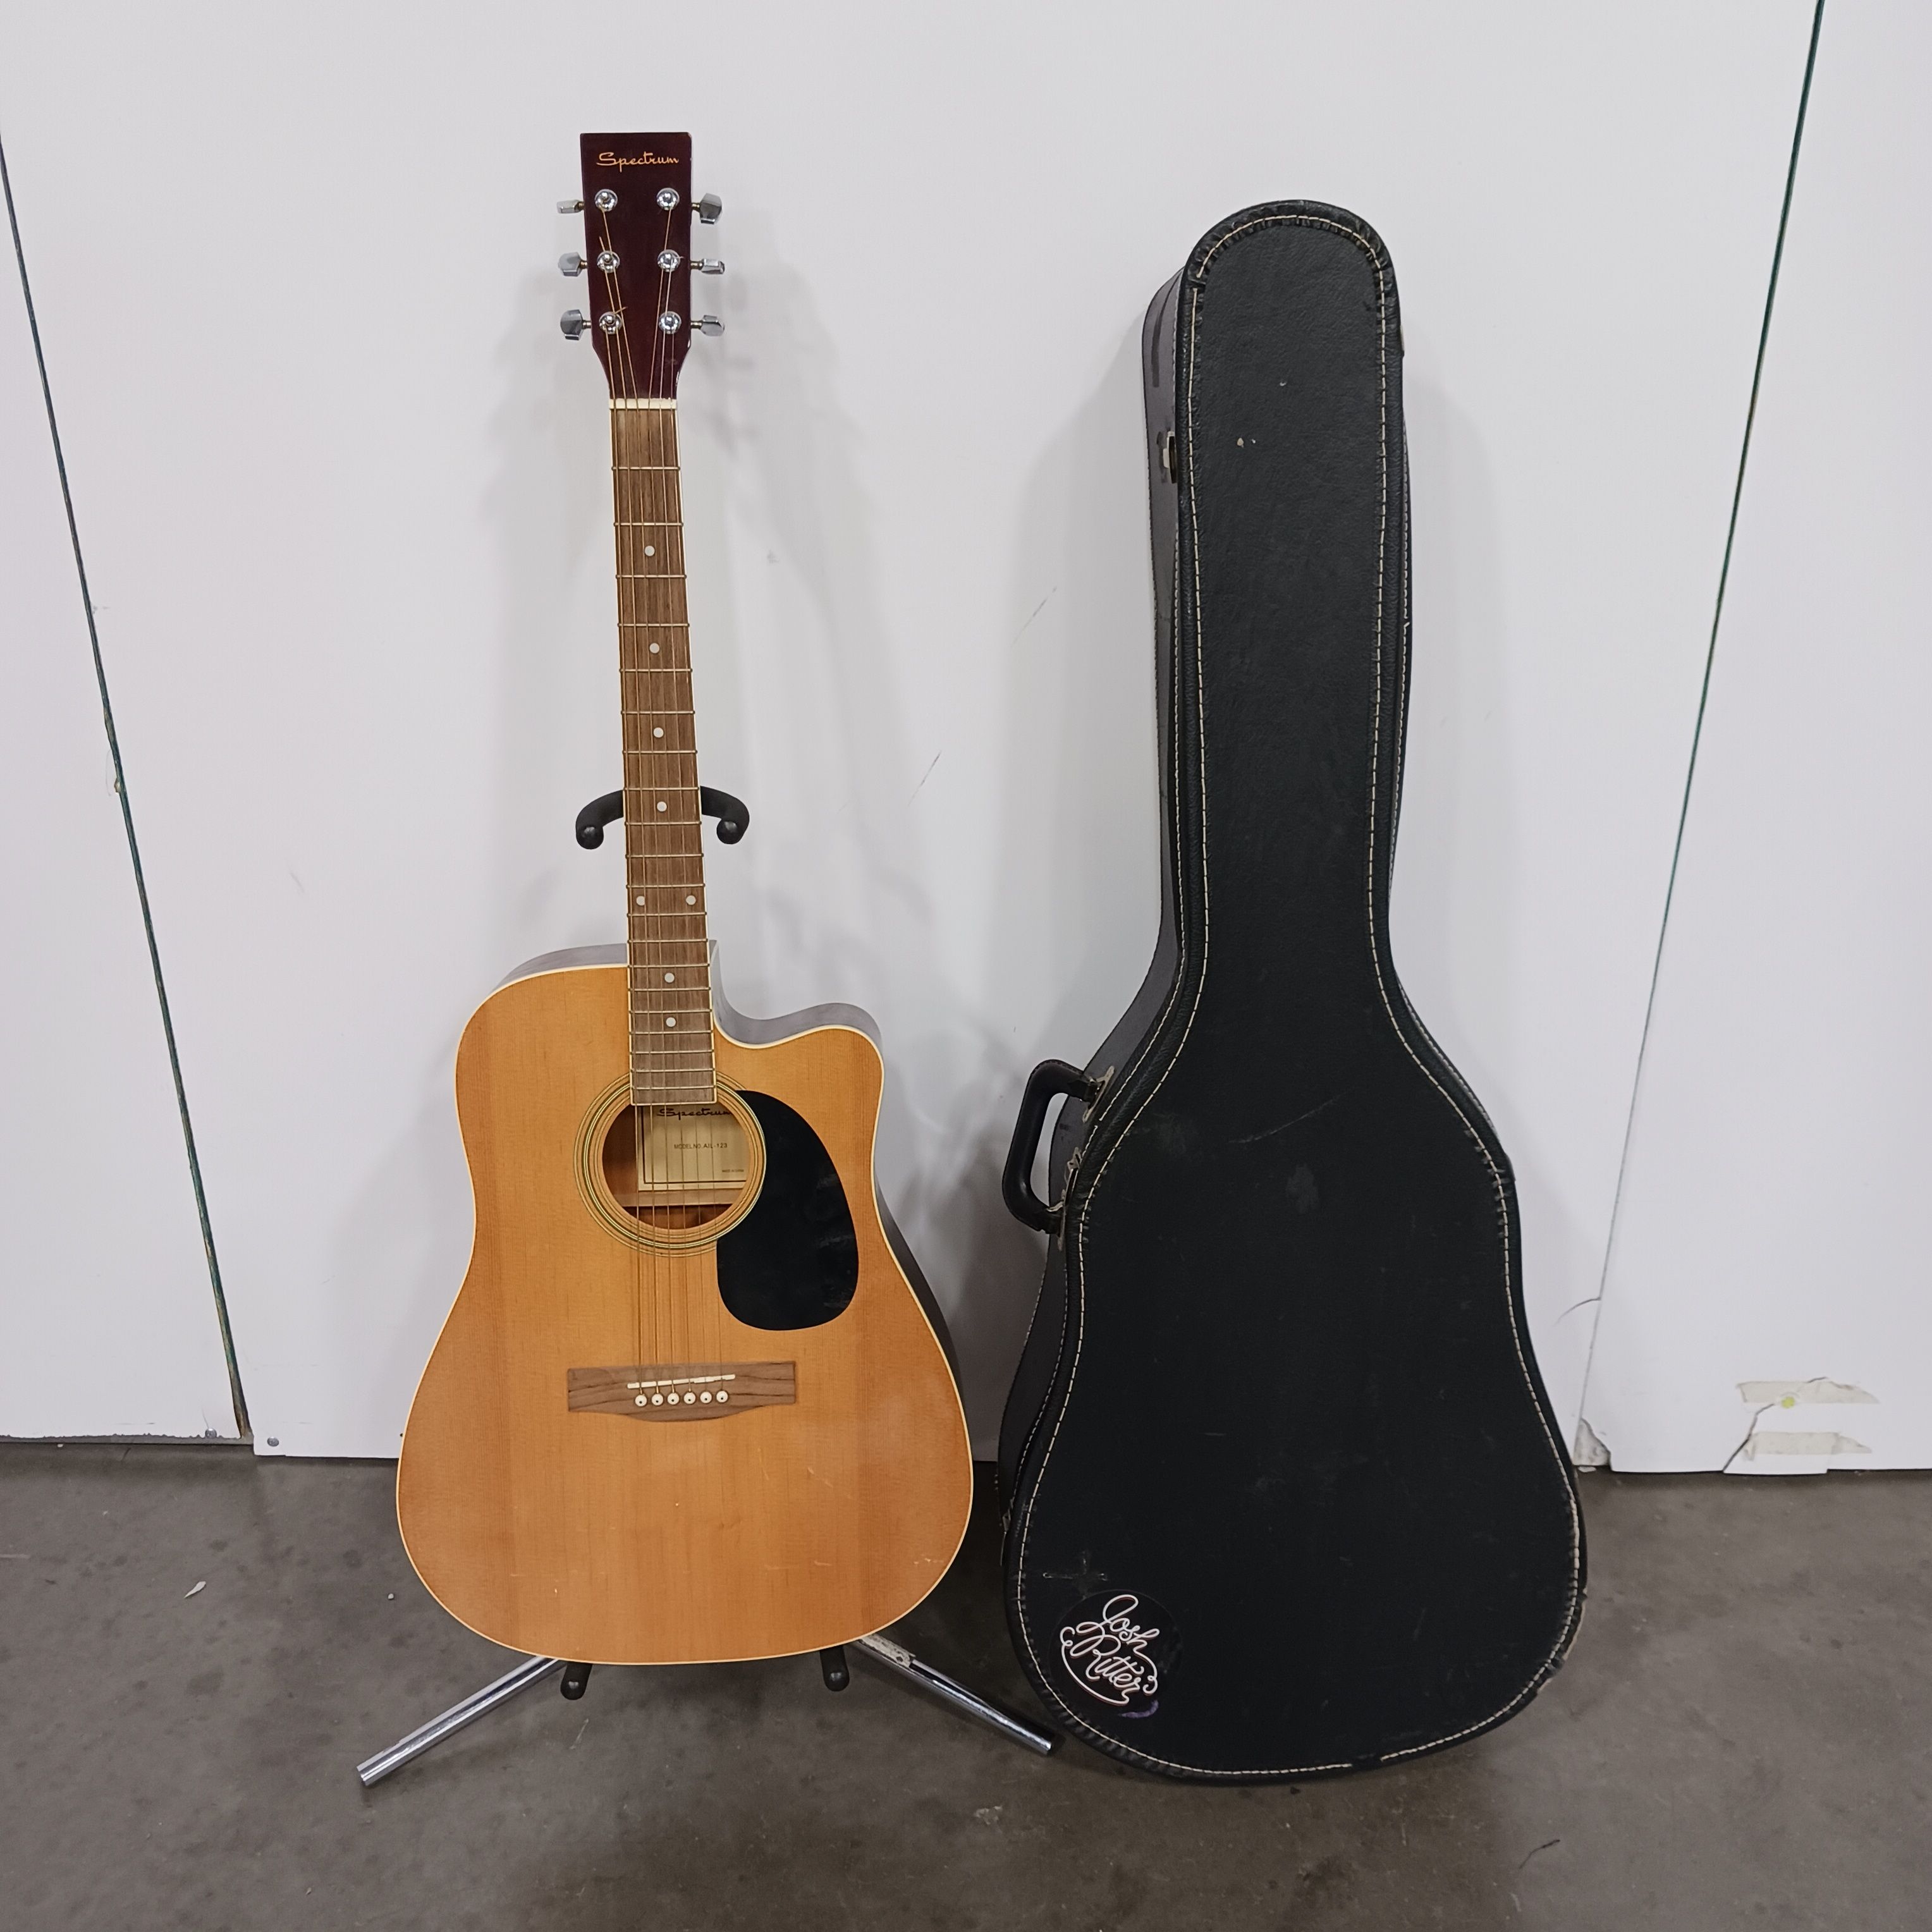 Buy the Spectrum AIL-123 Acoustic 6 String Wooden Guitar w/Case